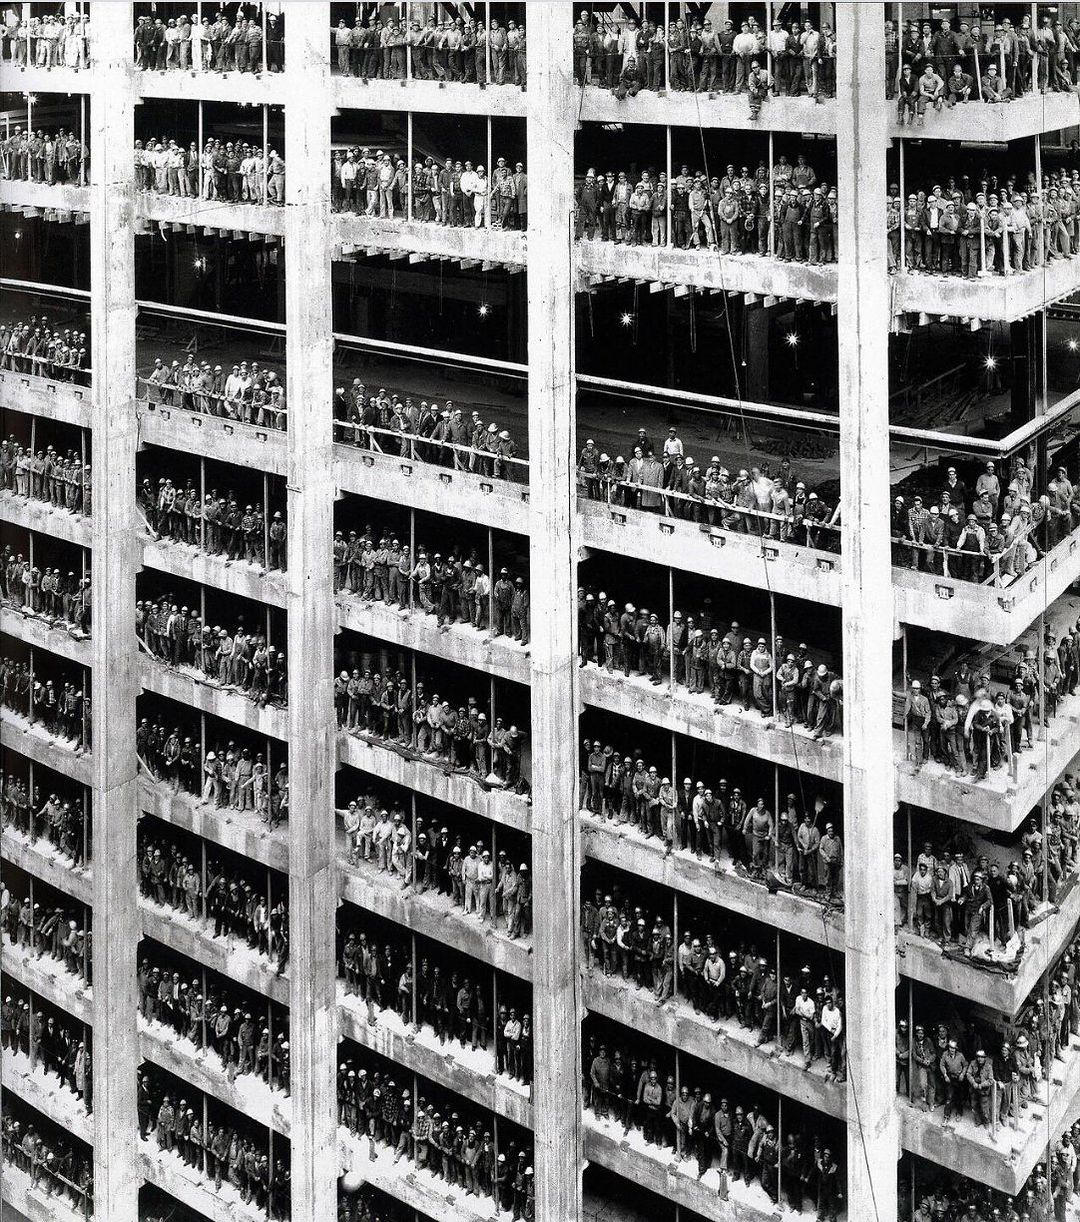 Historic Photographs - Over 3,000 workers who build the Chase Manhattan Bank in New York City pose f